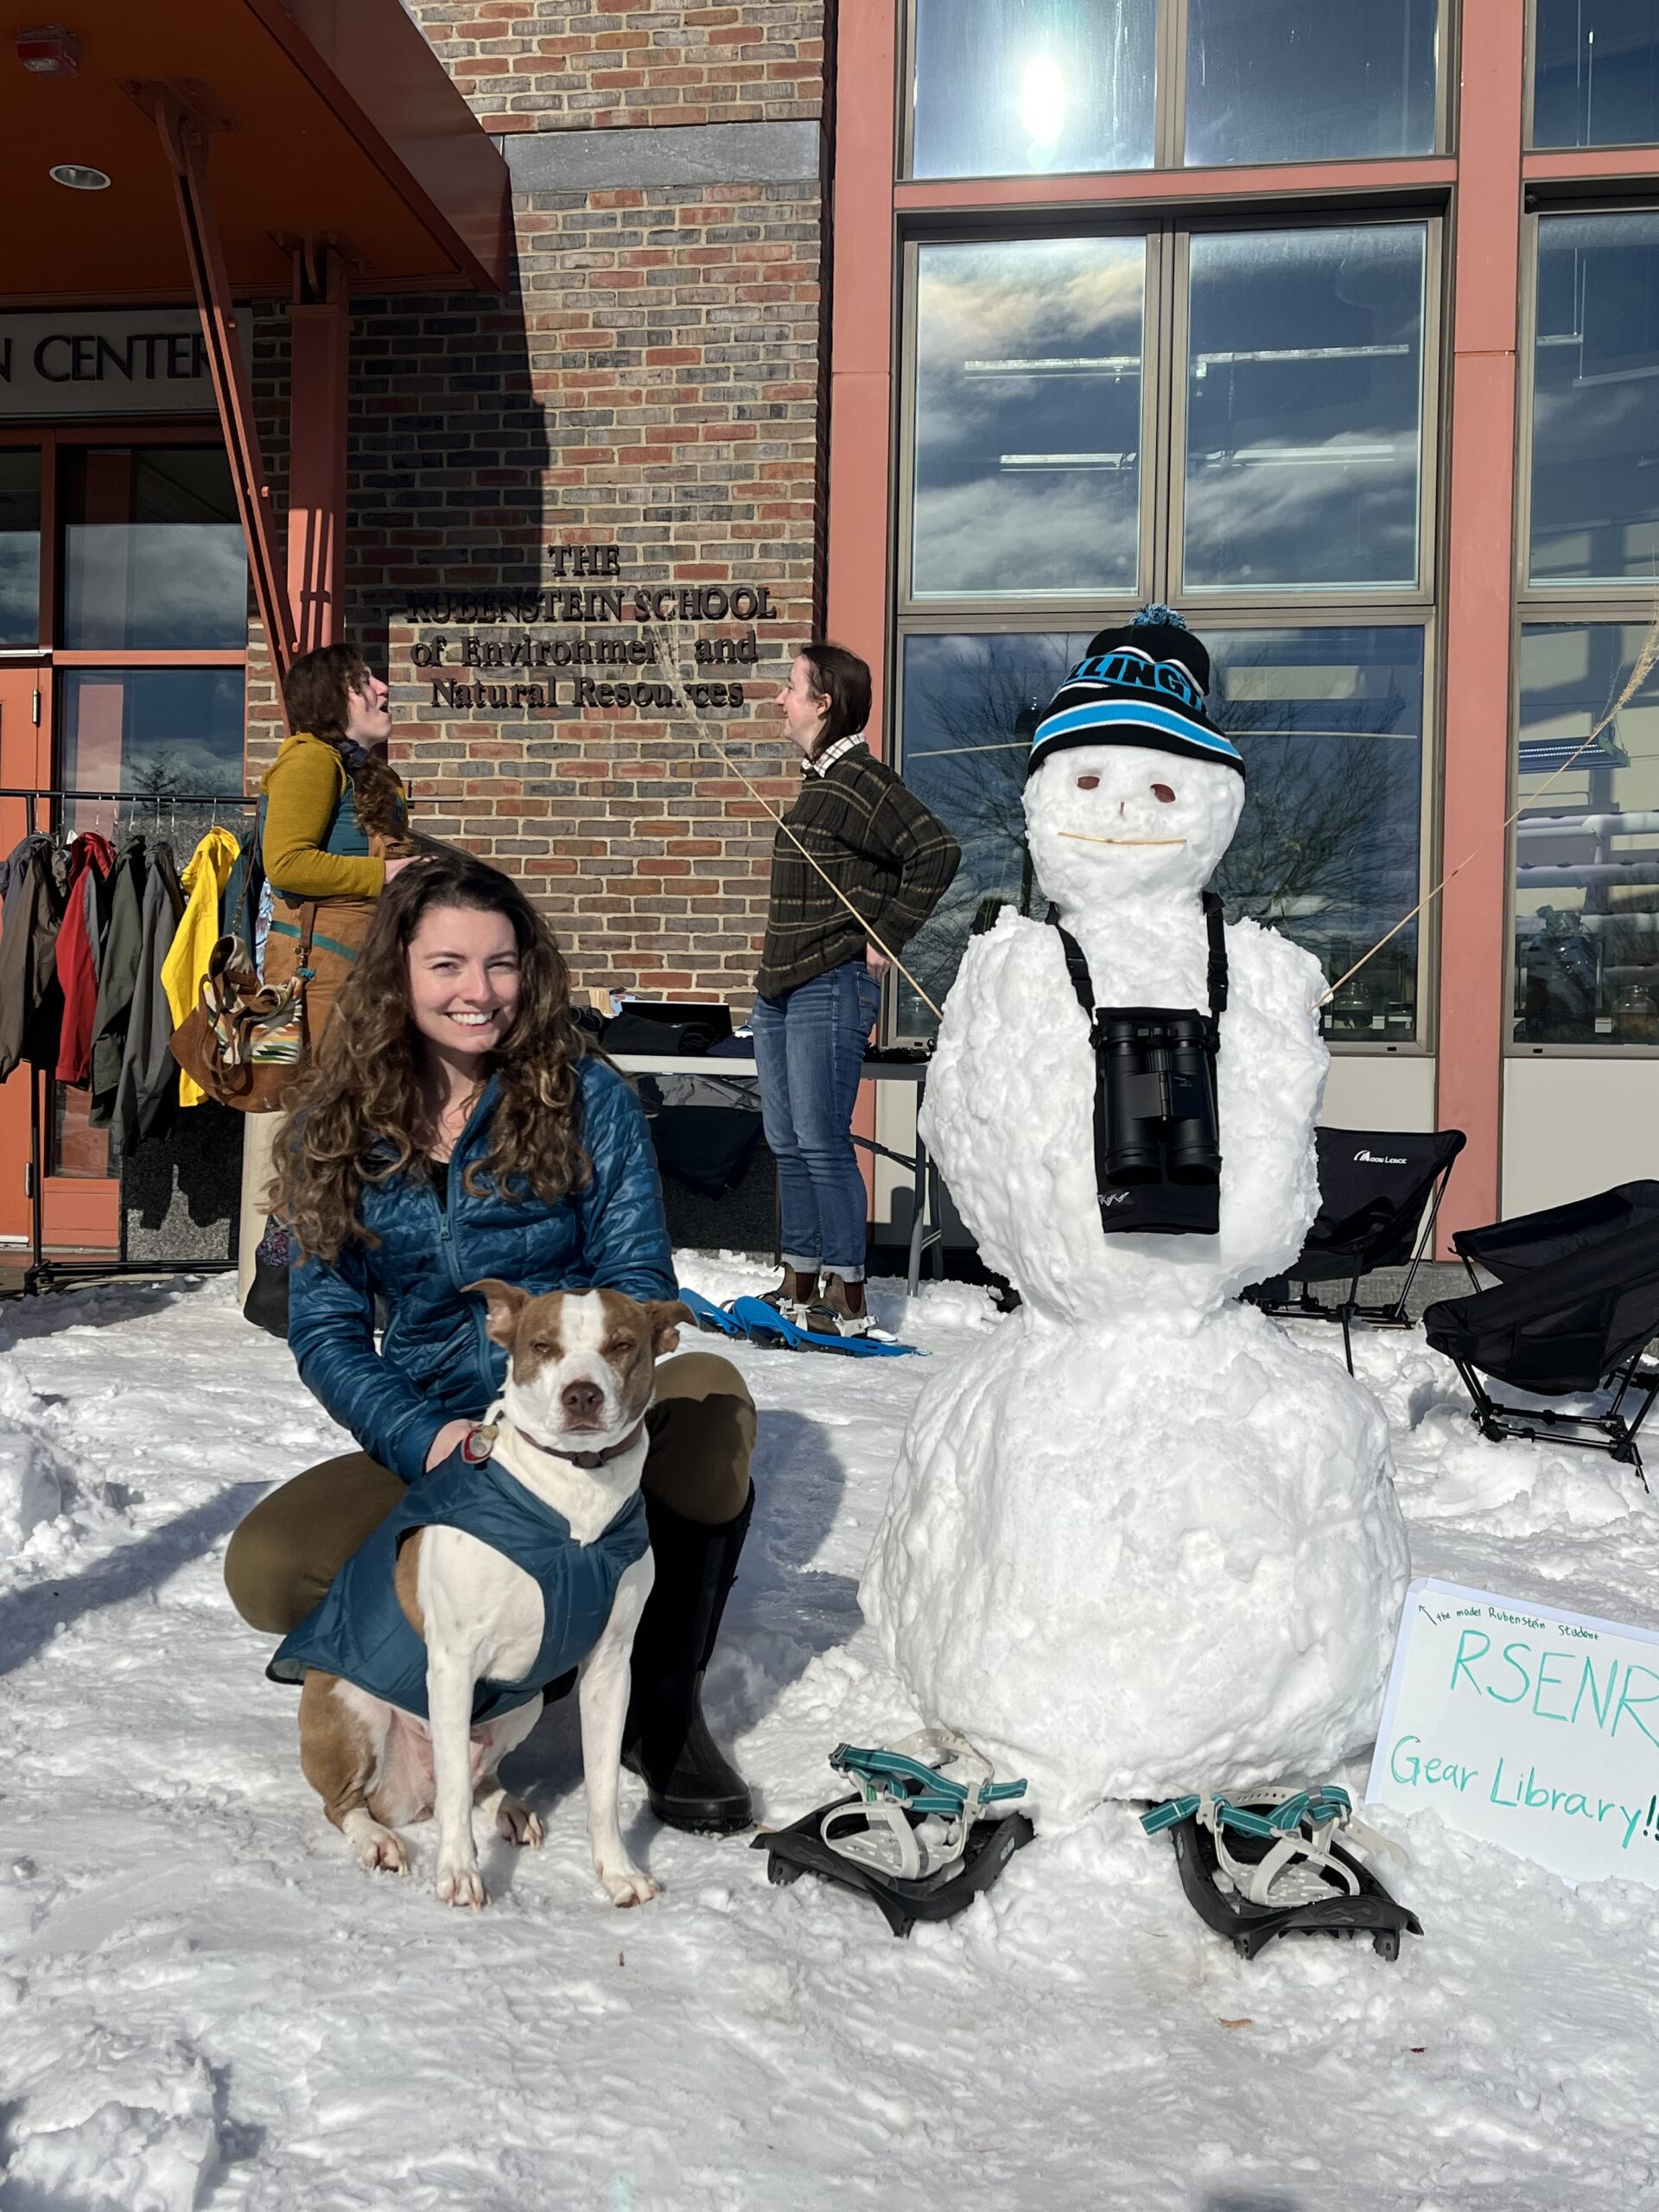 Brittany Claussen and her dog Ginny standing next to a snowperson wearing snowshoes and binoculars